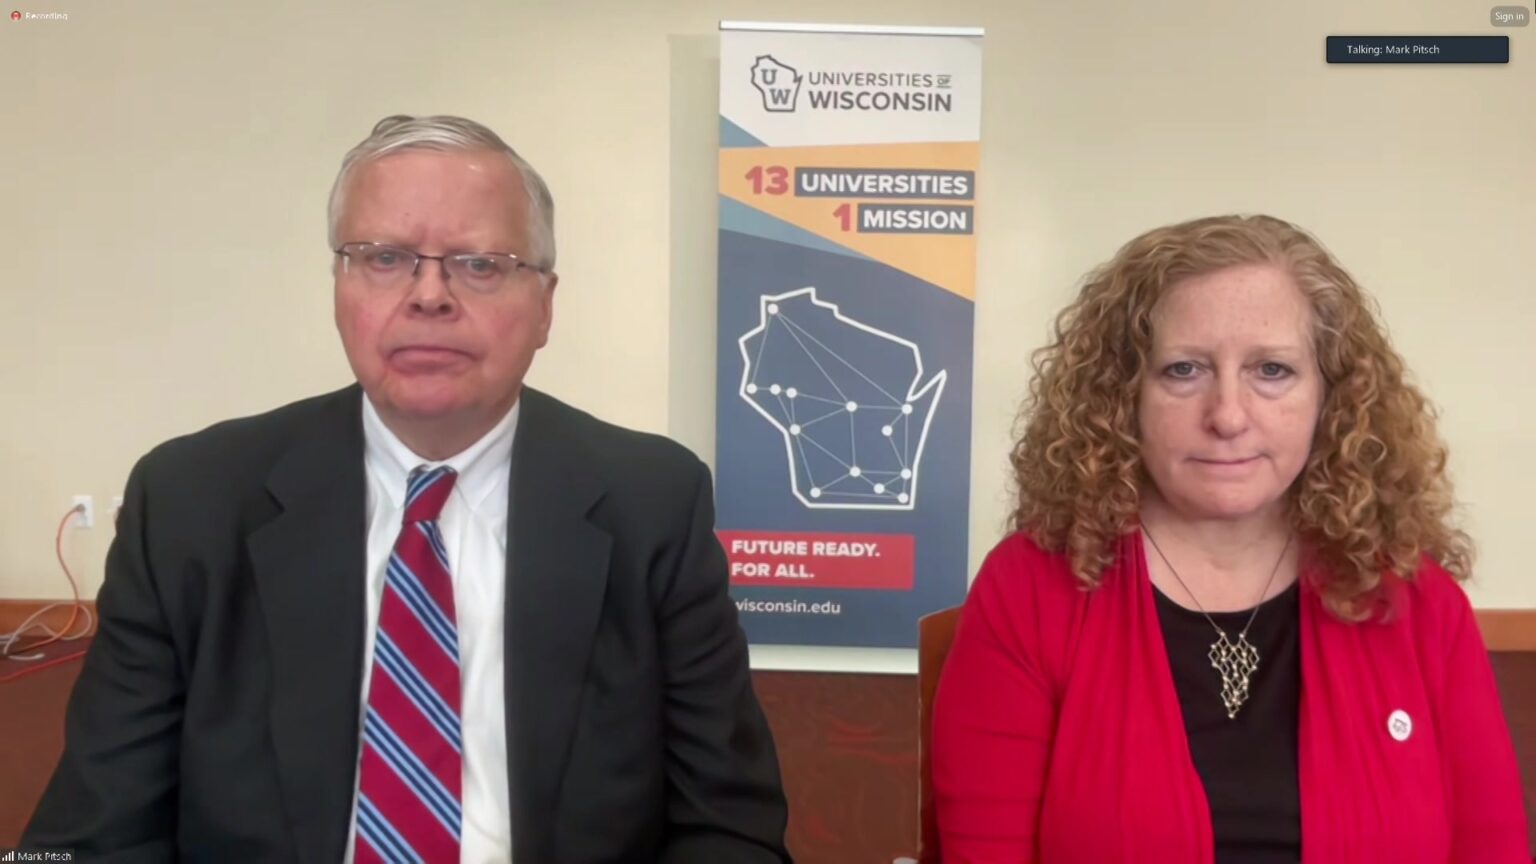 A still image from a video livestream shows Jay Rothman and Jennifer Mnookin seated in a room, with a banner in the background showing the Universities of Wisconsin wordmark and the words 13 universities, 1 mission and Future Ready. For All. with an outline of the state showing the location of each campus connected by lines.